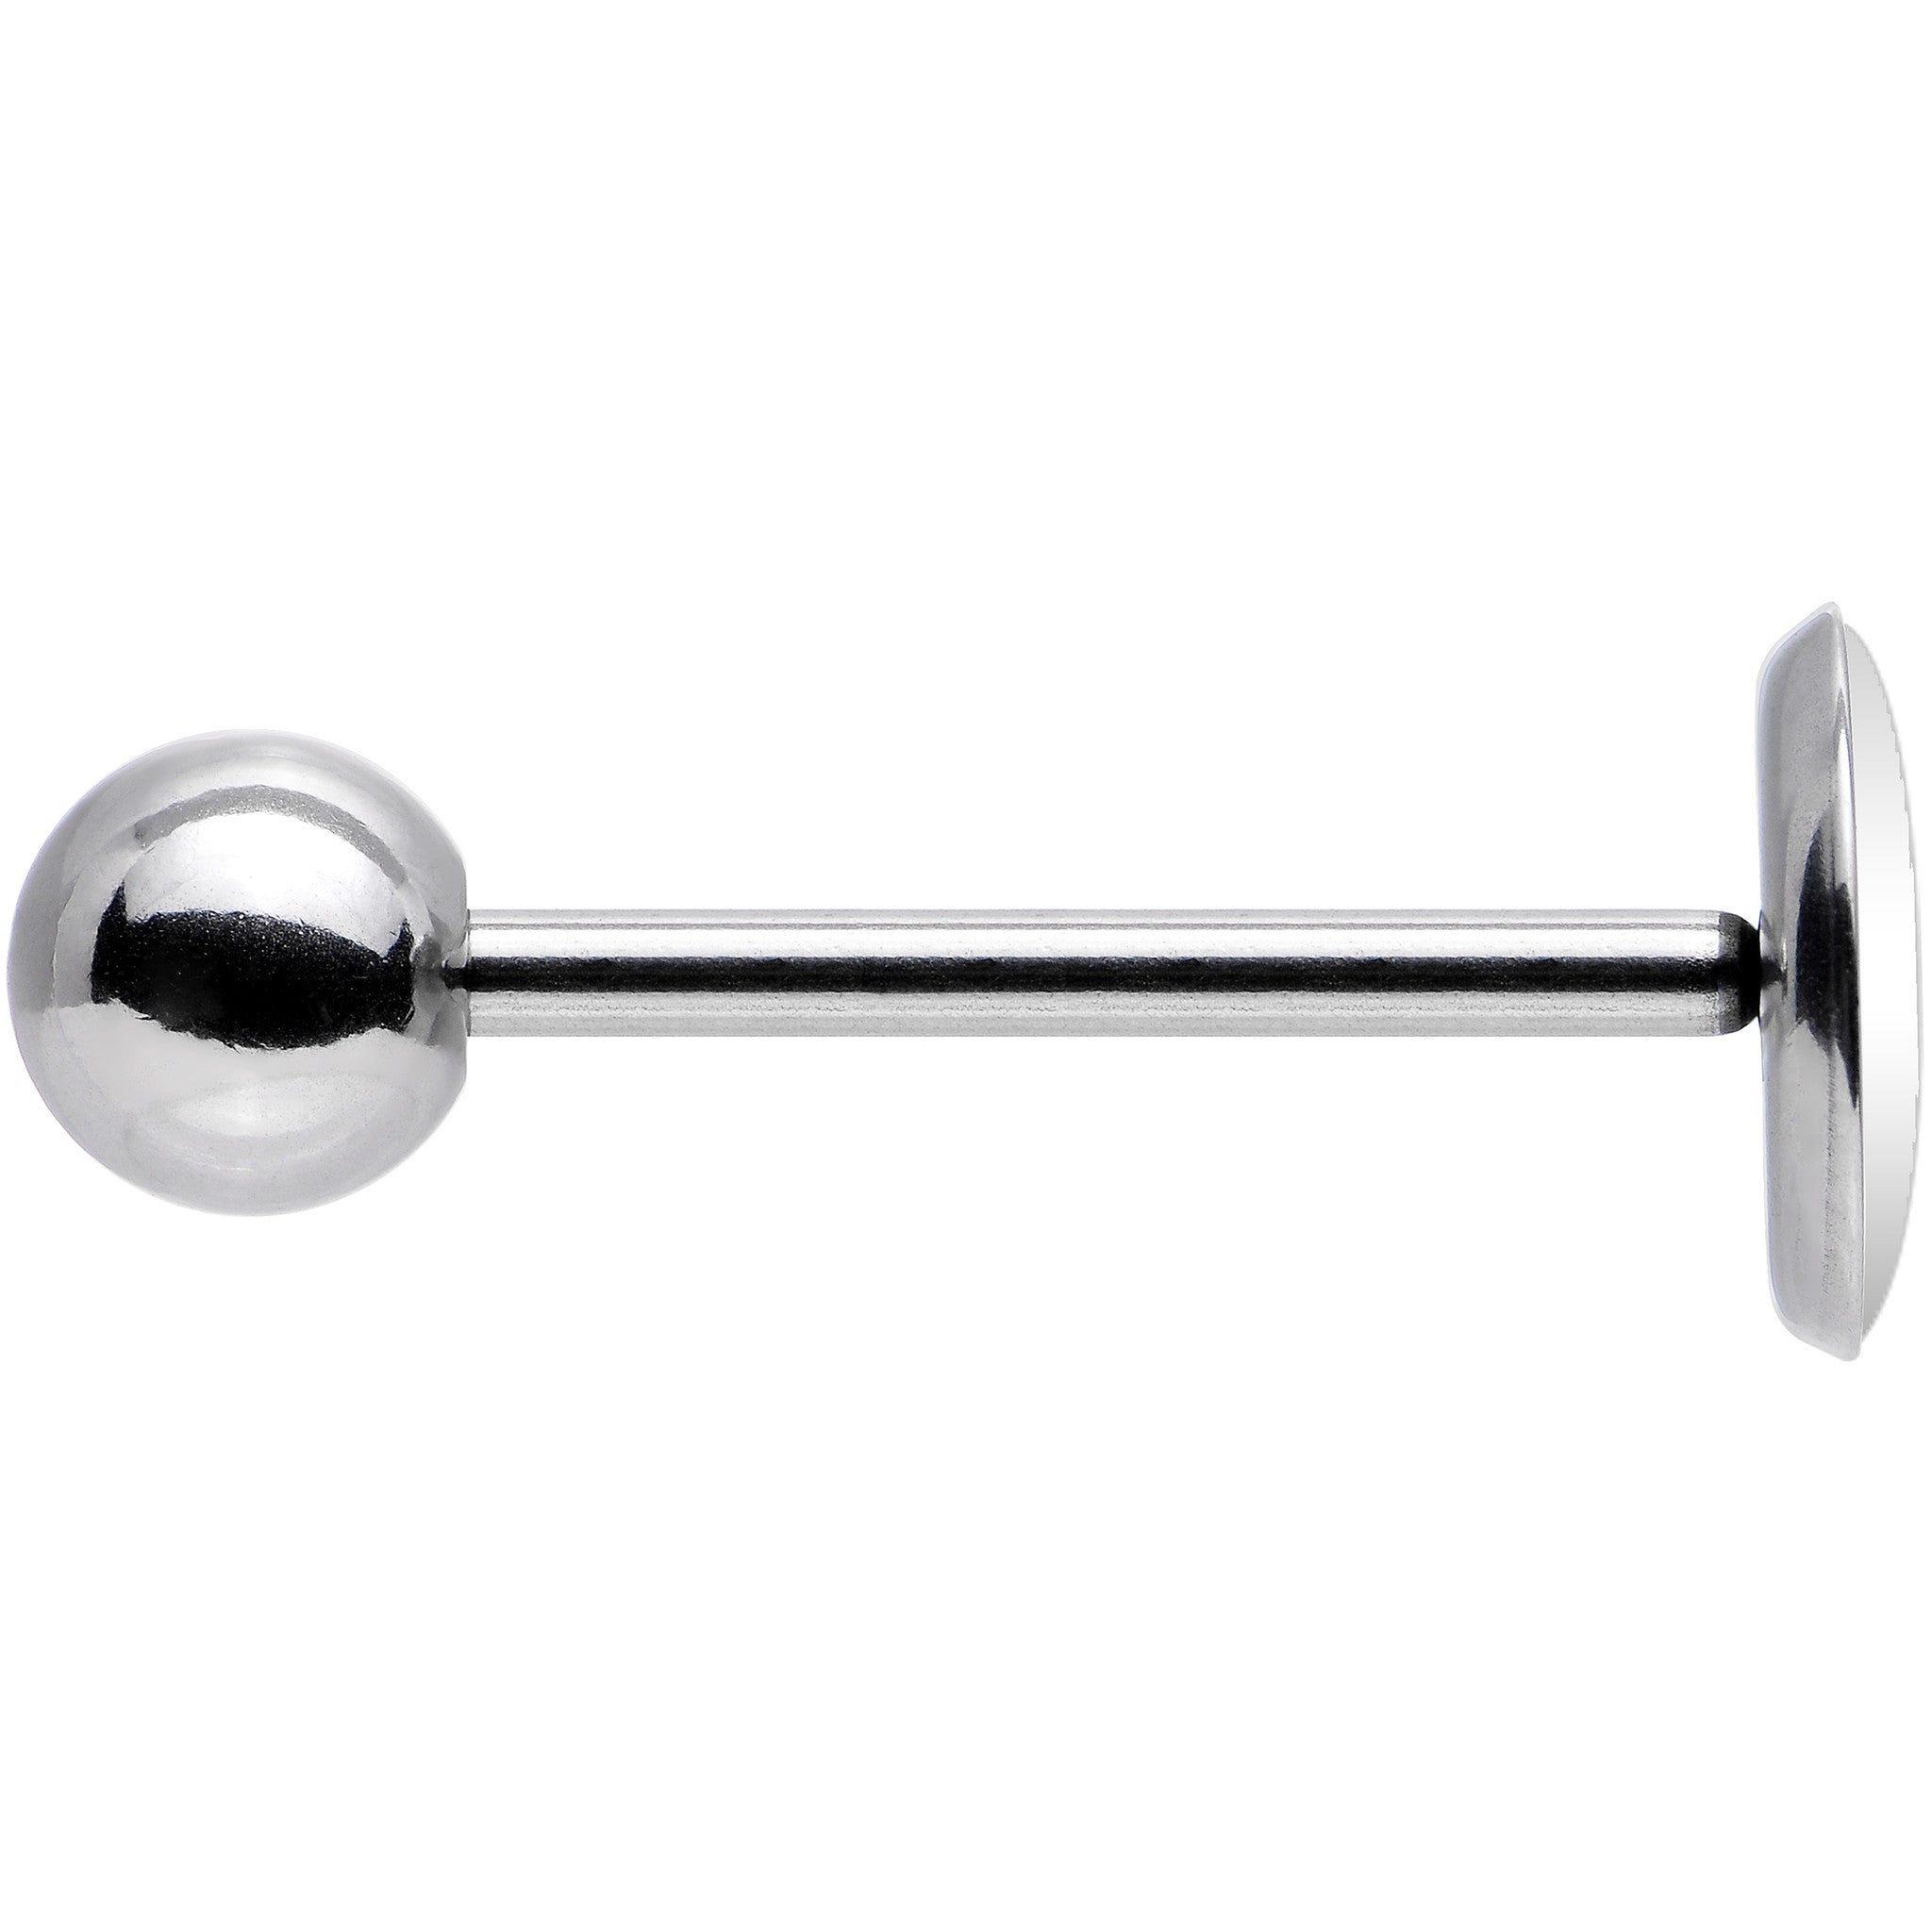 Stainless Steel Black and White F*ck Off Barbell Tongue Ring